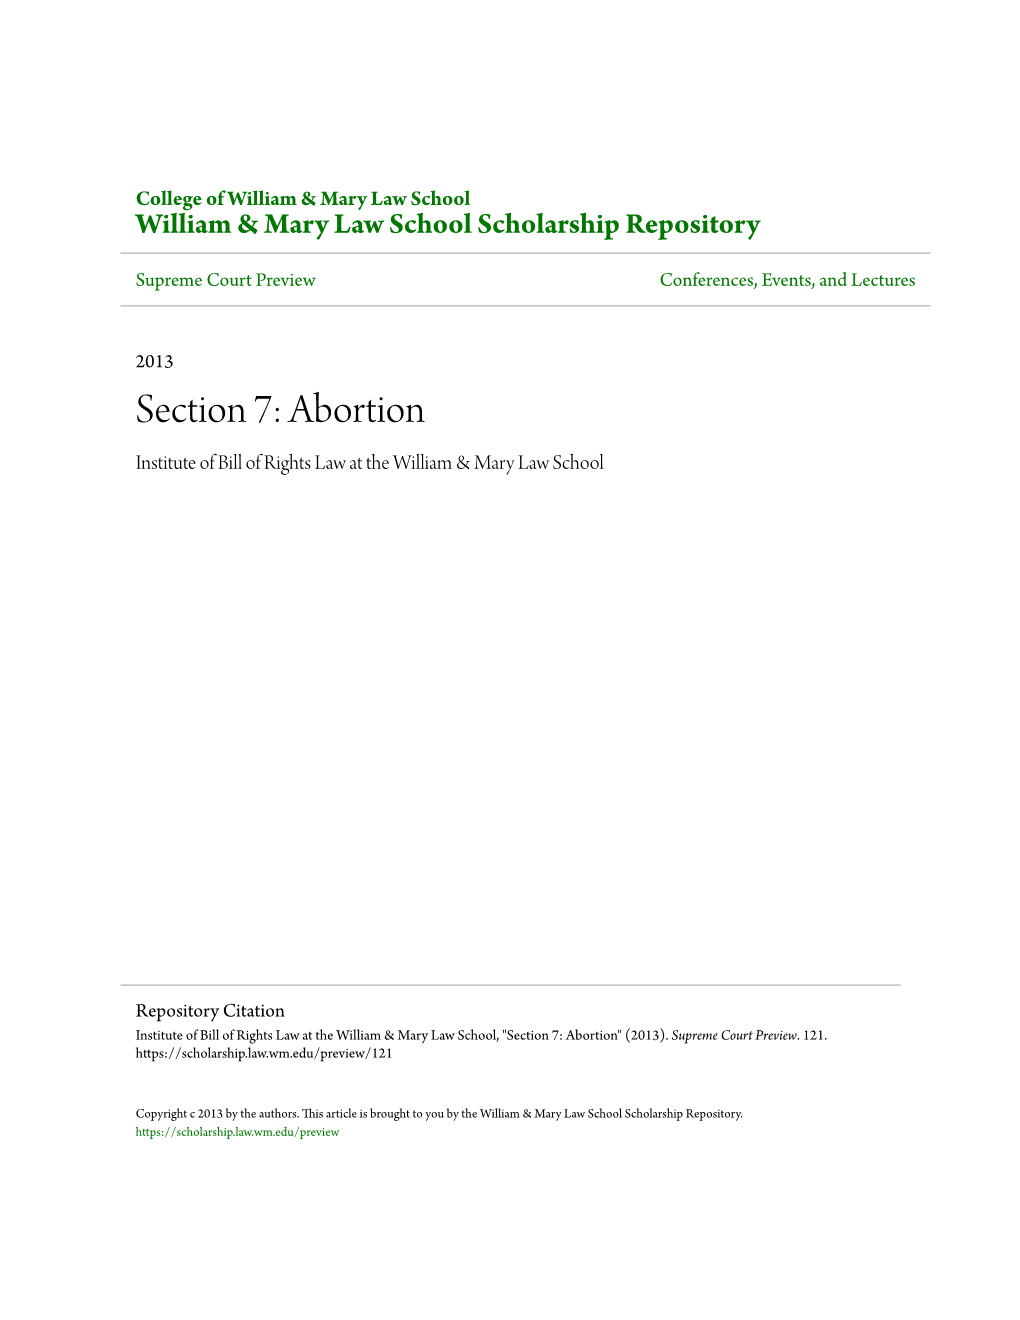 Abortion Institute of Bill of Rights Law at the William & Mary Law School